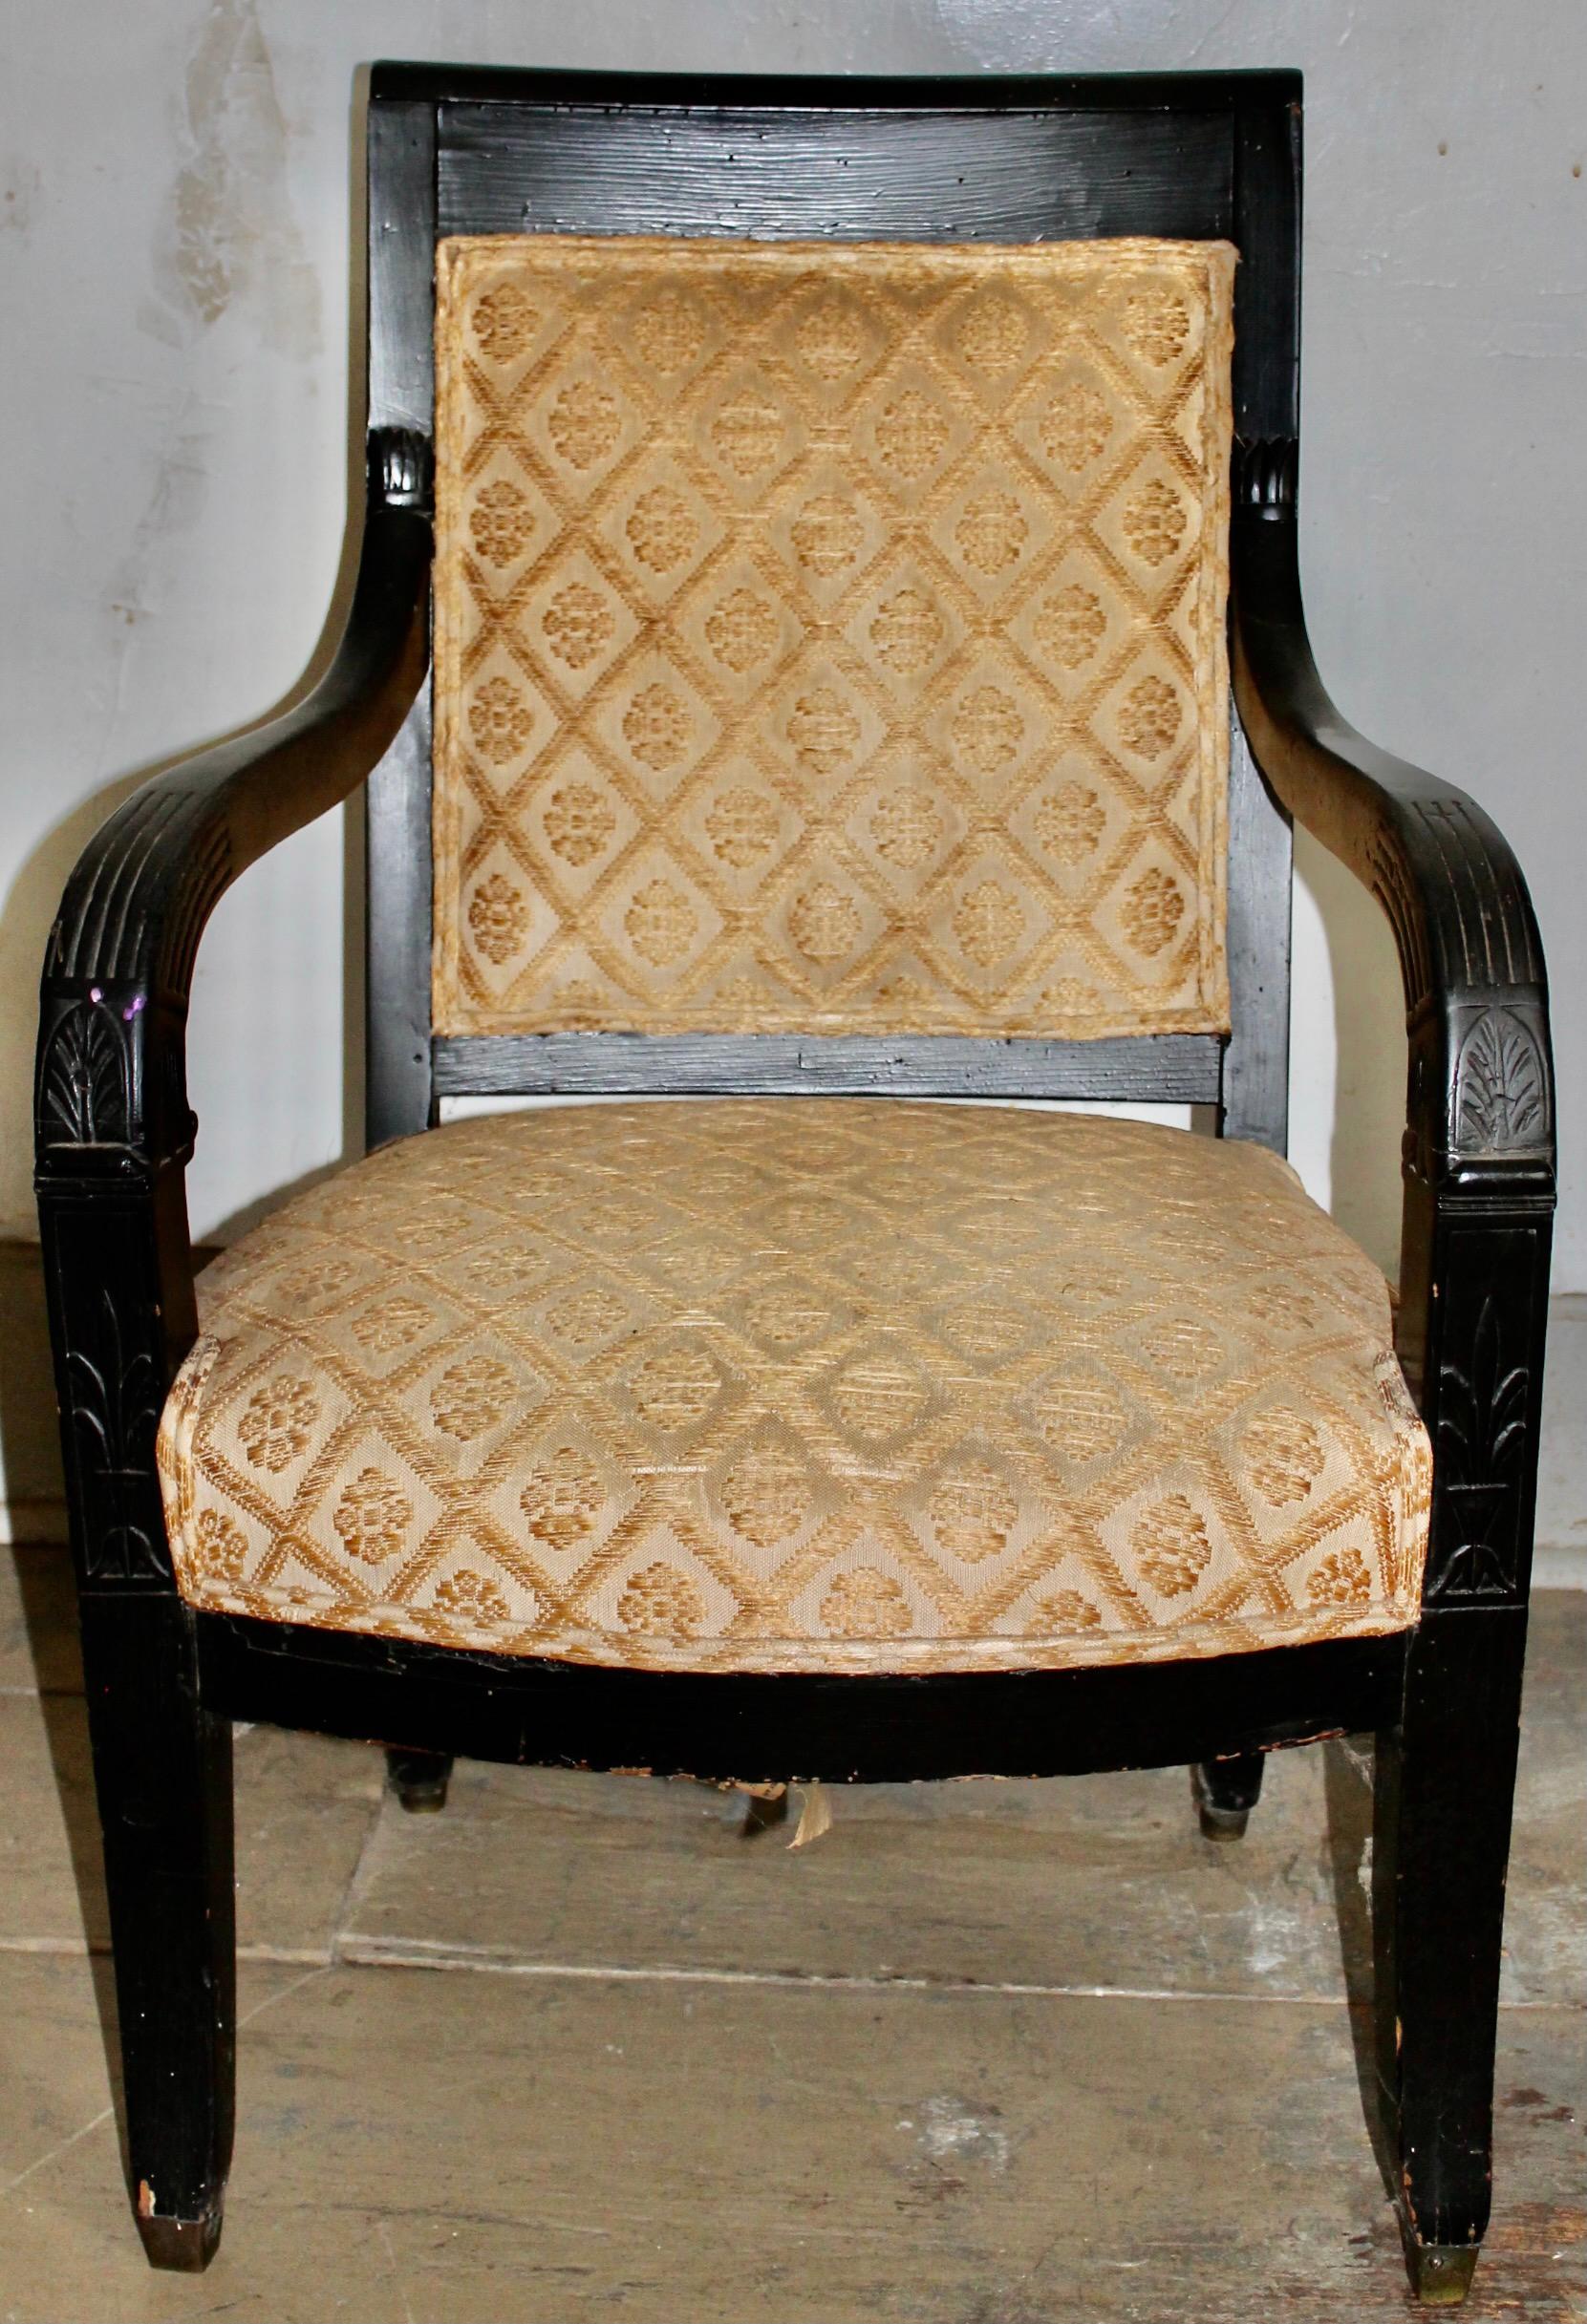 Impressive black armchair of typical French Empire form, beautifully upholstered. Subtly incised palmettes where the arm rails meet the seat.  Original brass sabots. 17